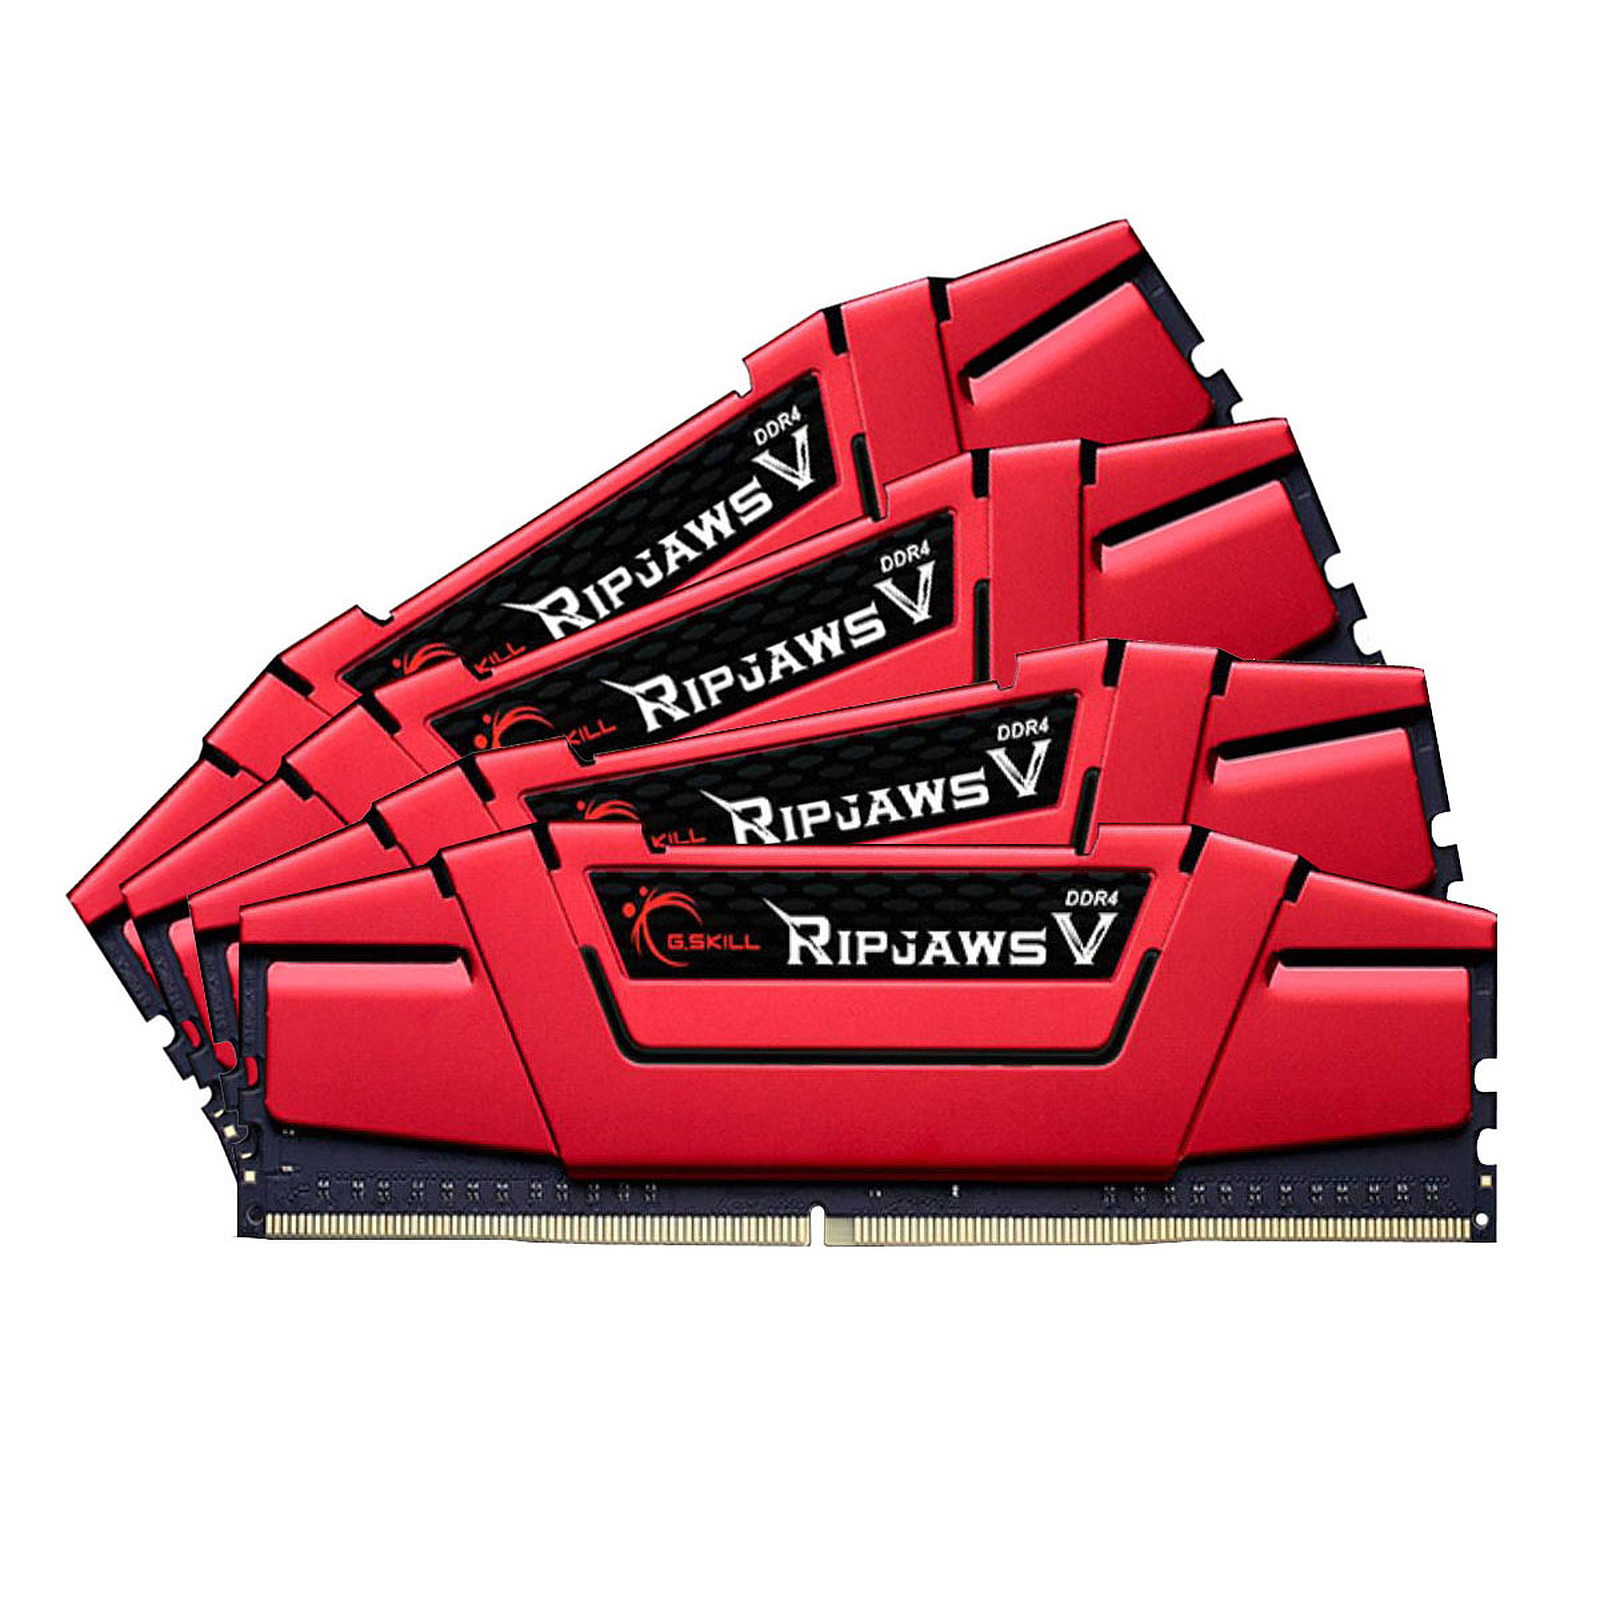 G.Skill RipJaws 5 Series Rouge 64 Go (4 x 16 Go) DDR4 3000 MHz CL16 - Memoire PC G.Skill